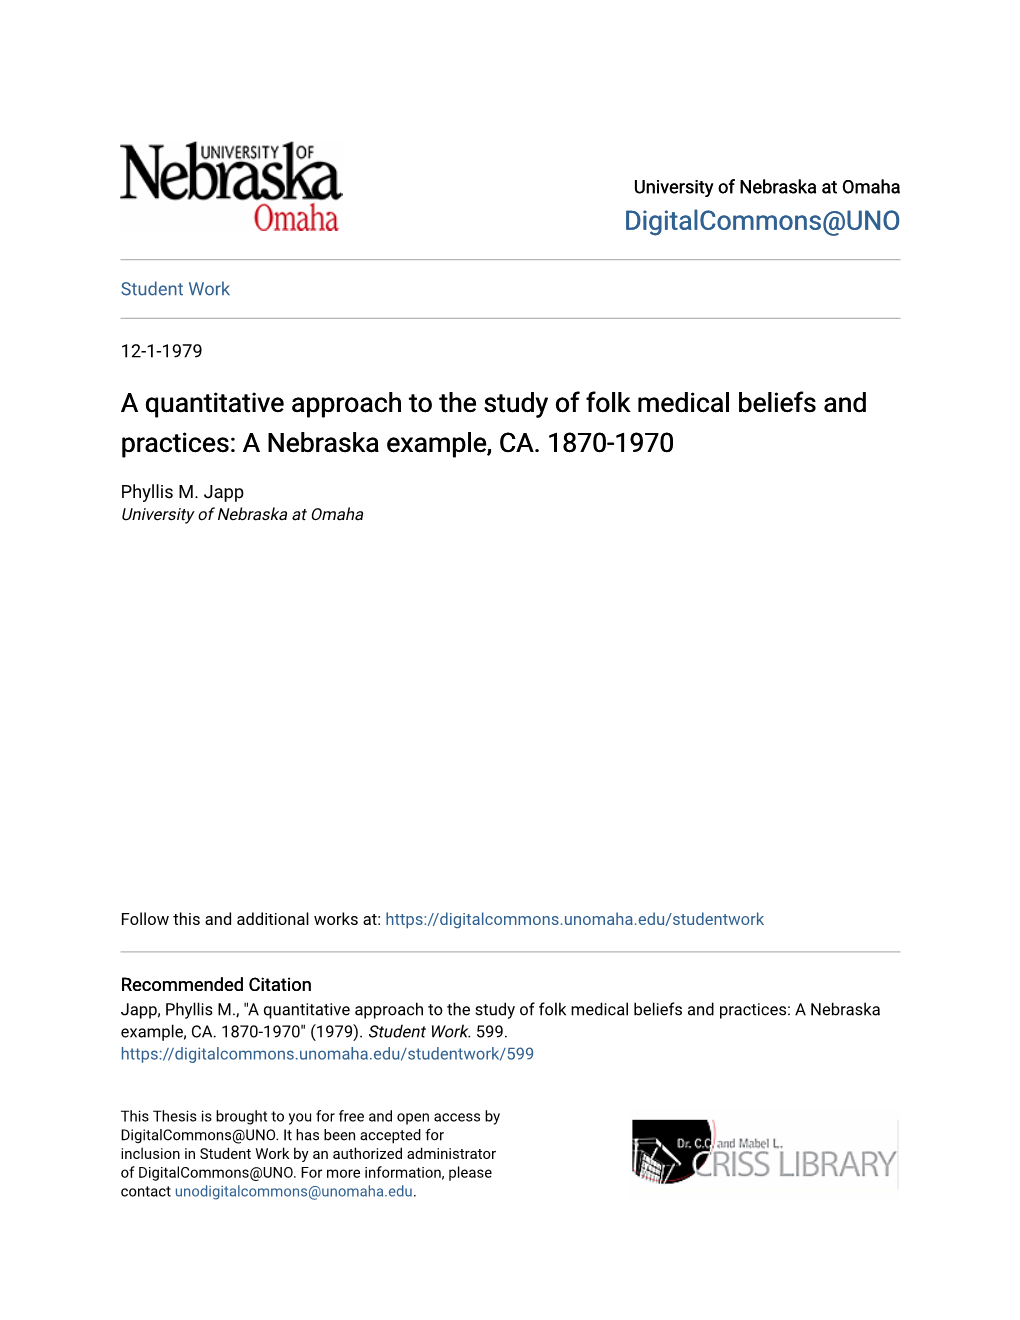 A Quantitative Approach to the Study of Folk Medical Beliefs and Practices: a Nebraska Example, CA